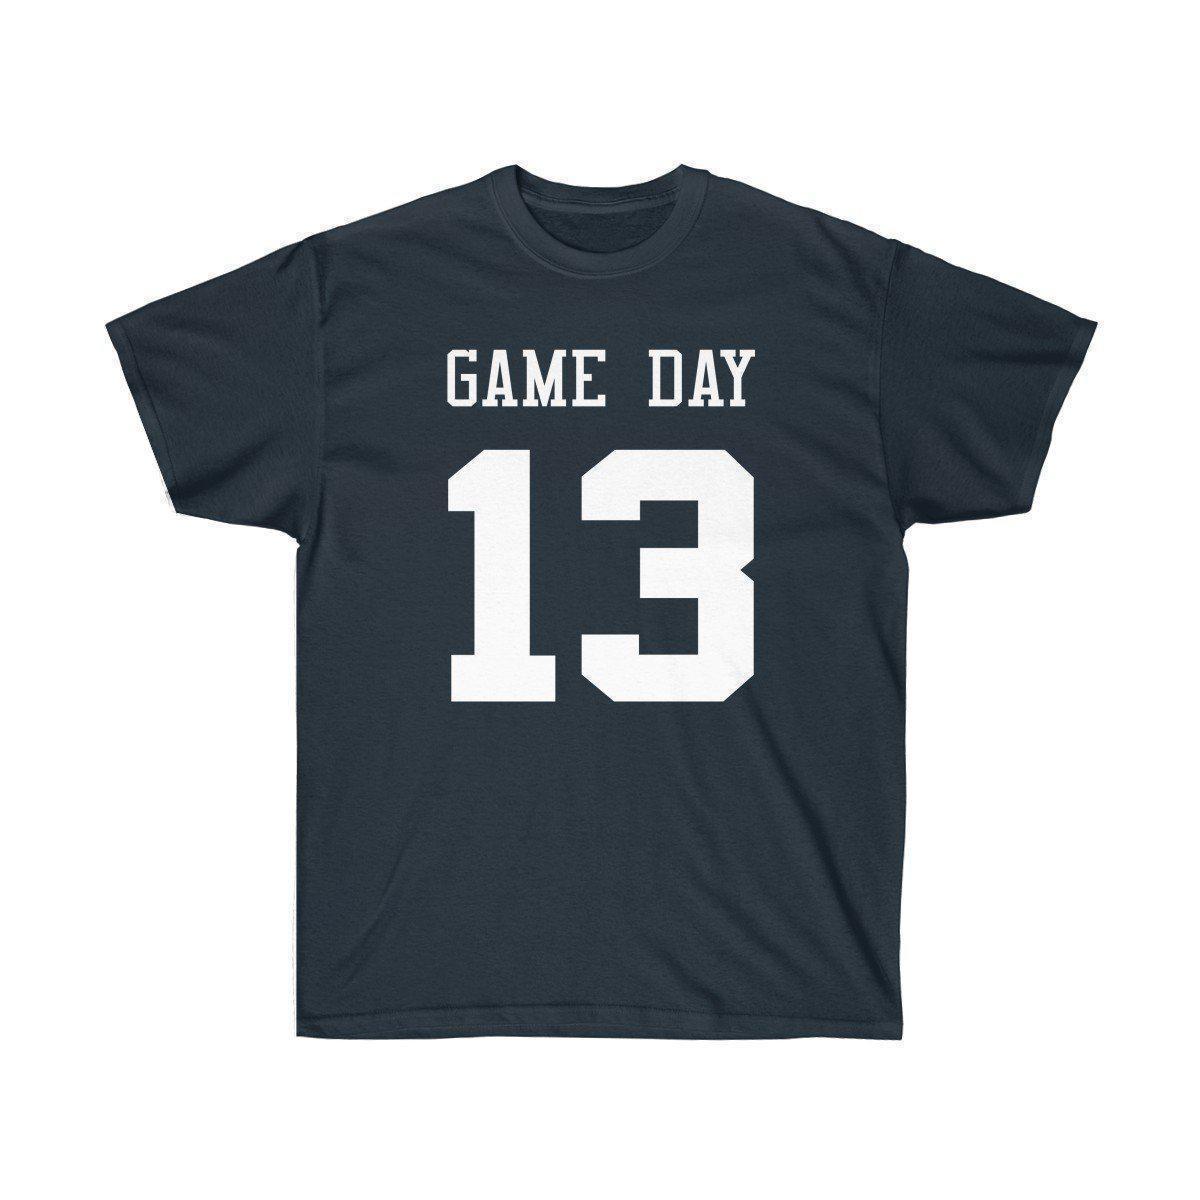 Game Day Tee - Sports T-shirt for Football, Basket, Soccer games-Navy-S-Archethype